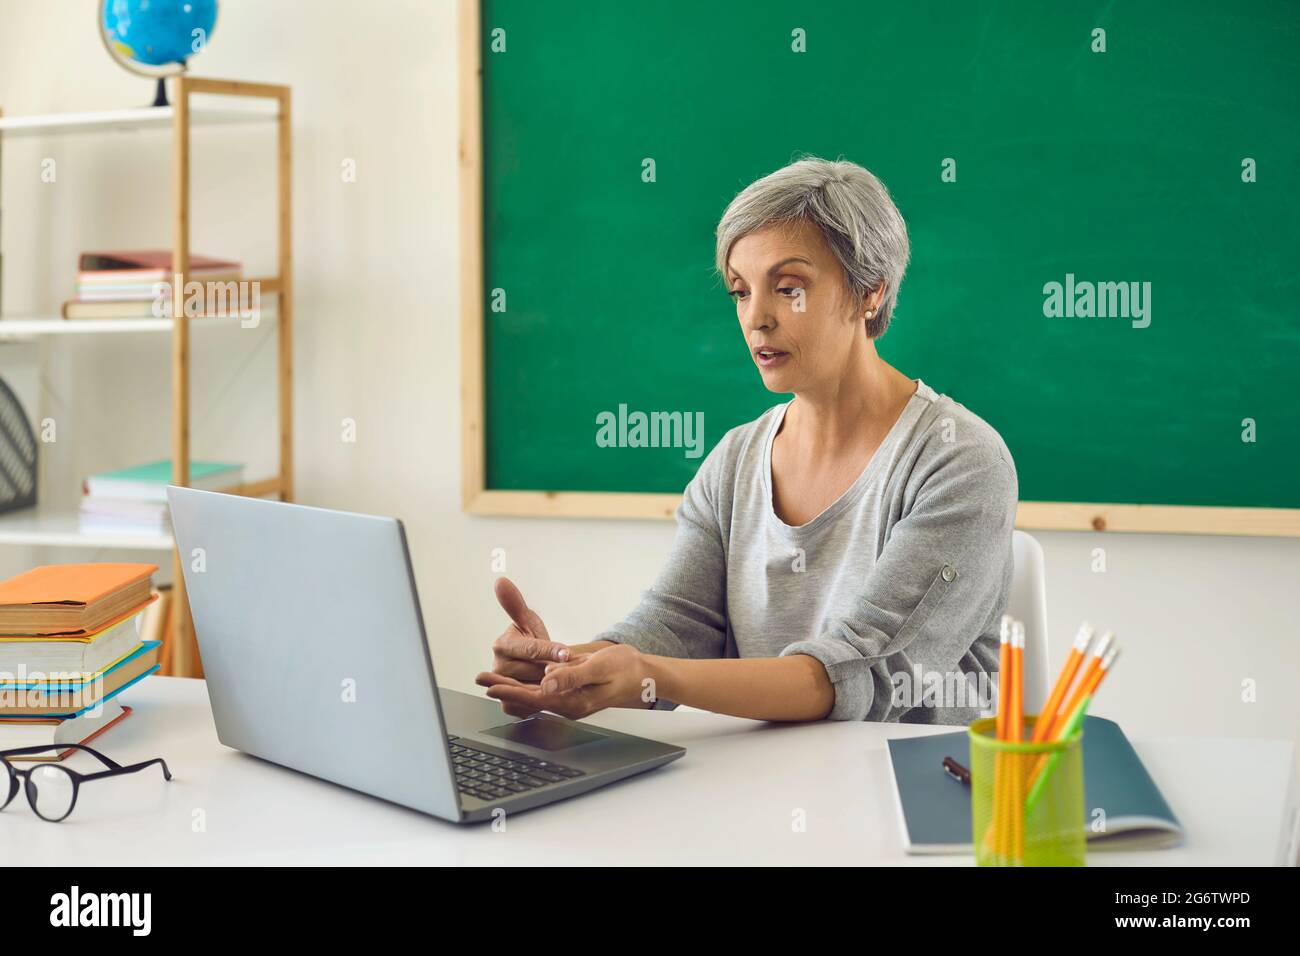 Online learning education. Female senior teacher is teaching students or schoolchildren using a video conference has a laptop in the classroom. Stock Photo